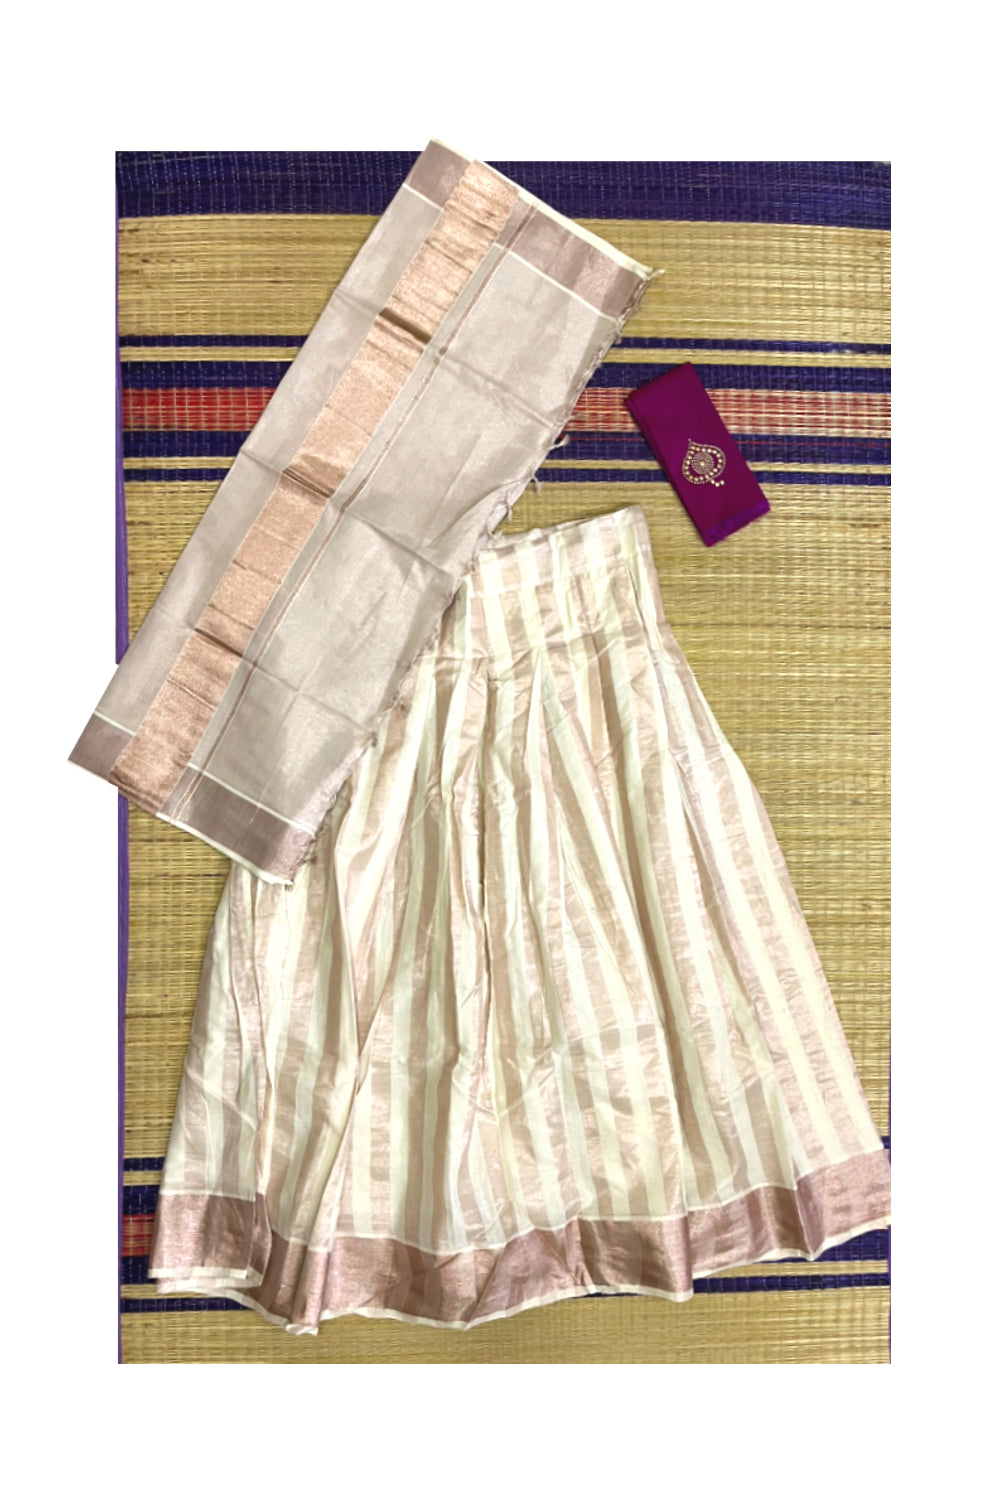 Semi Stitched Dhavani Set with Pink Kasavu Lines Cotton Pavada and Magenta Bead Work Blouse Piece